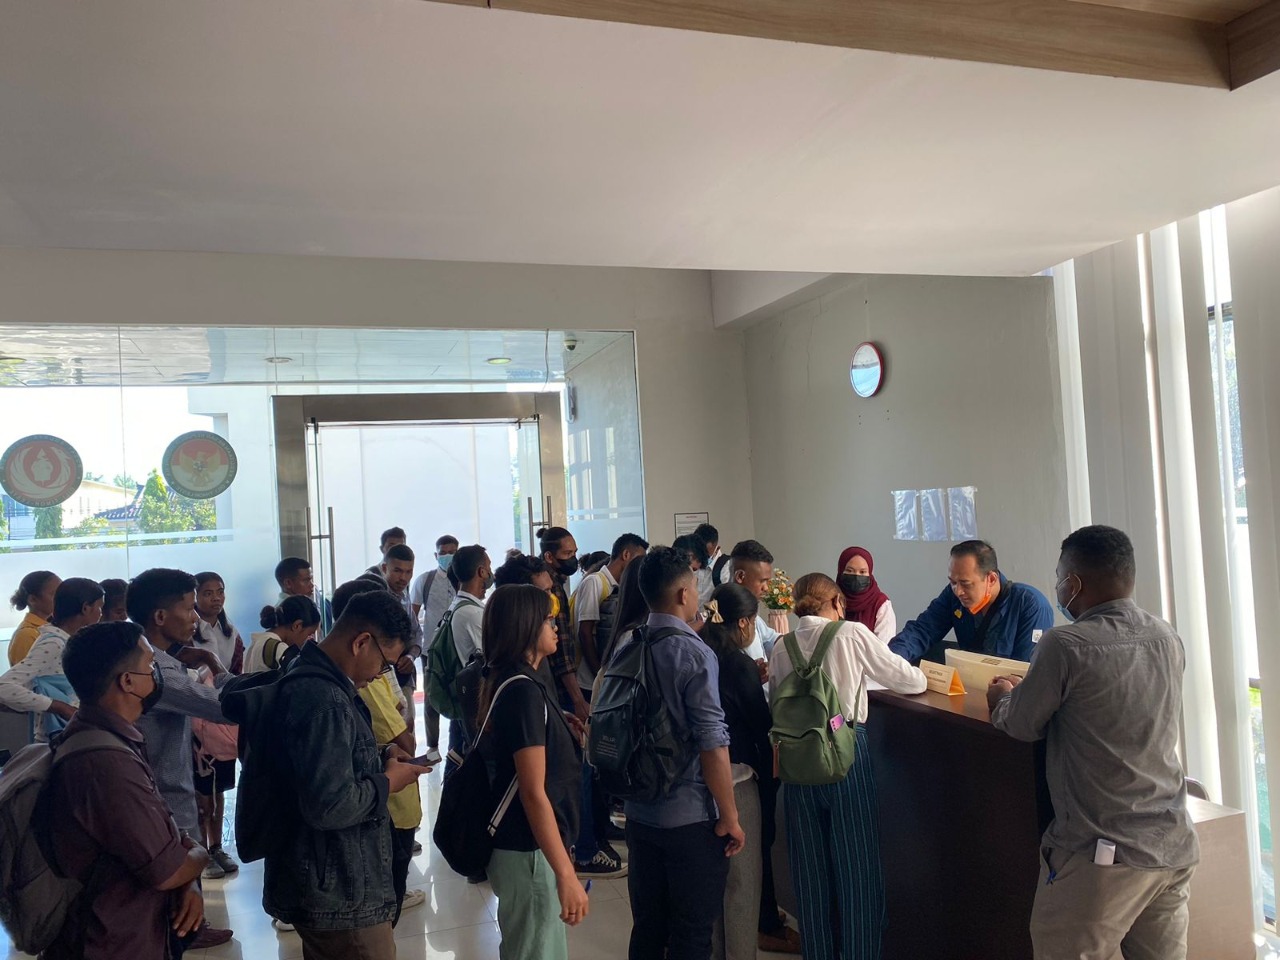 Queue for registration of prospective international student participants at the ITS entrance test in Timor Leste